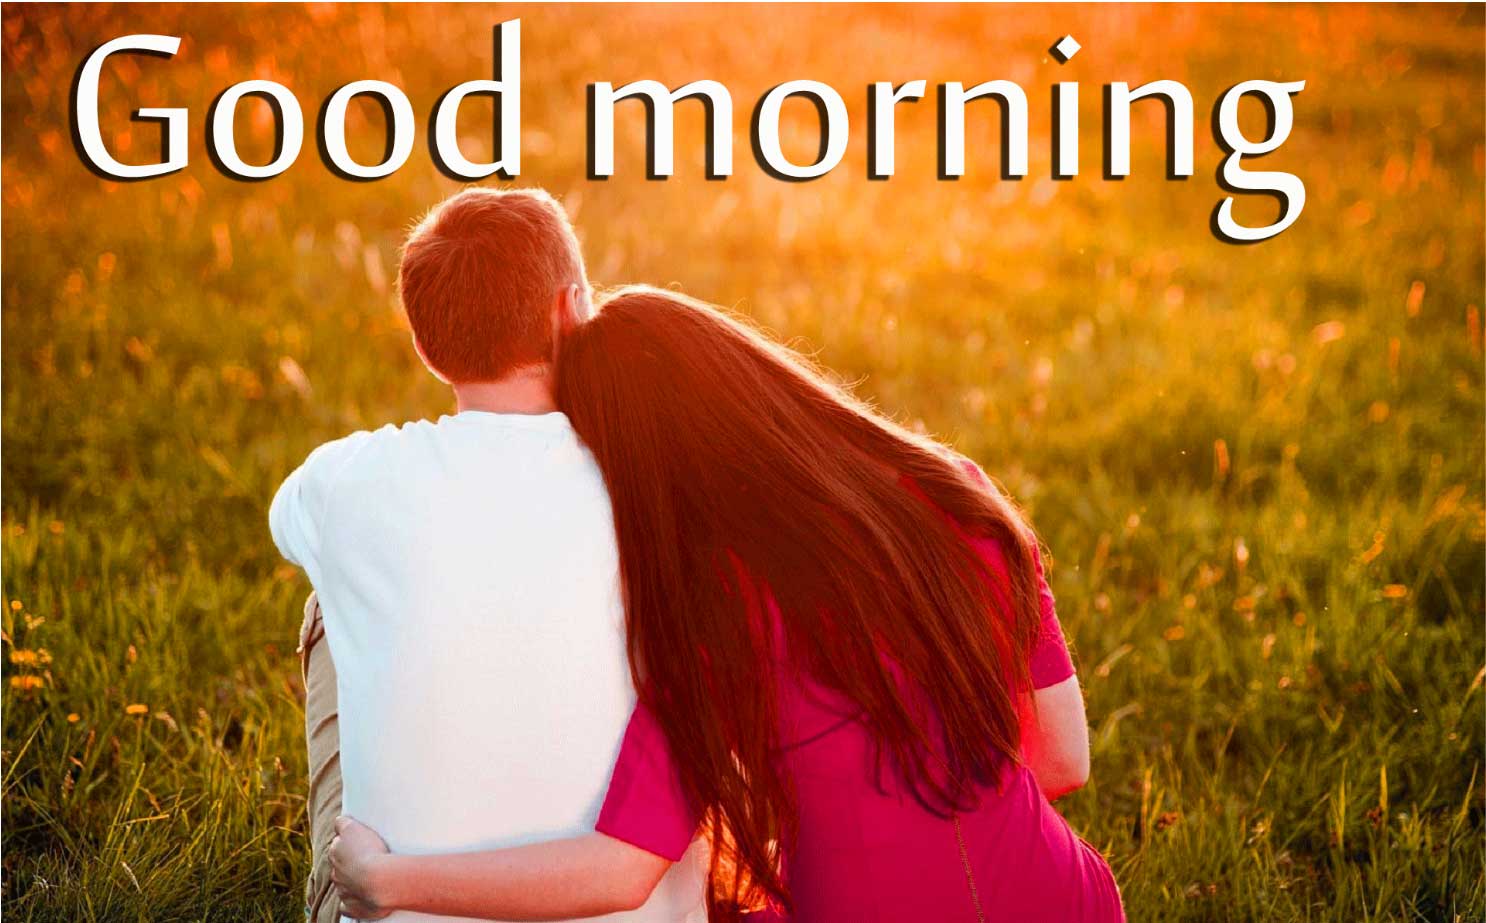 good morning love couple images hd download